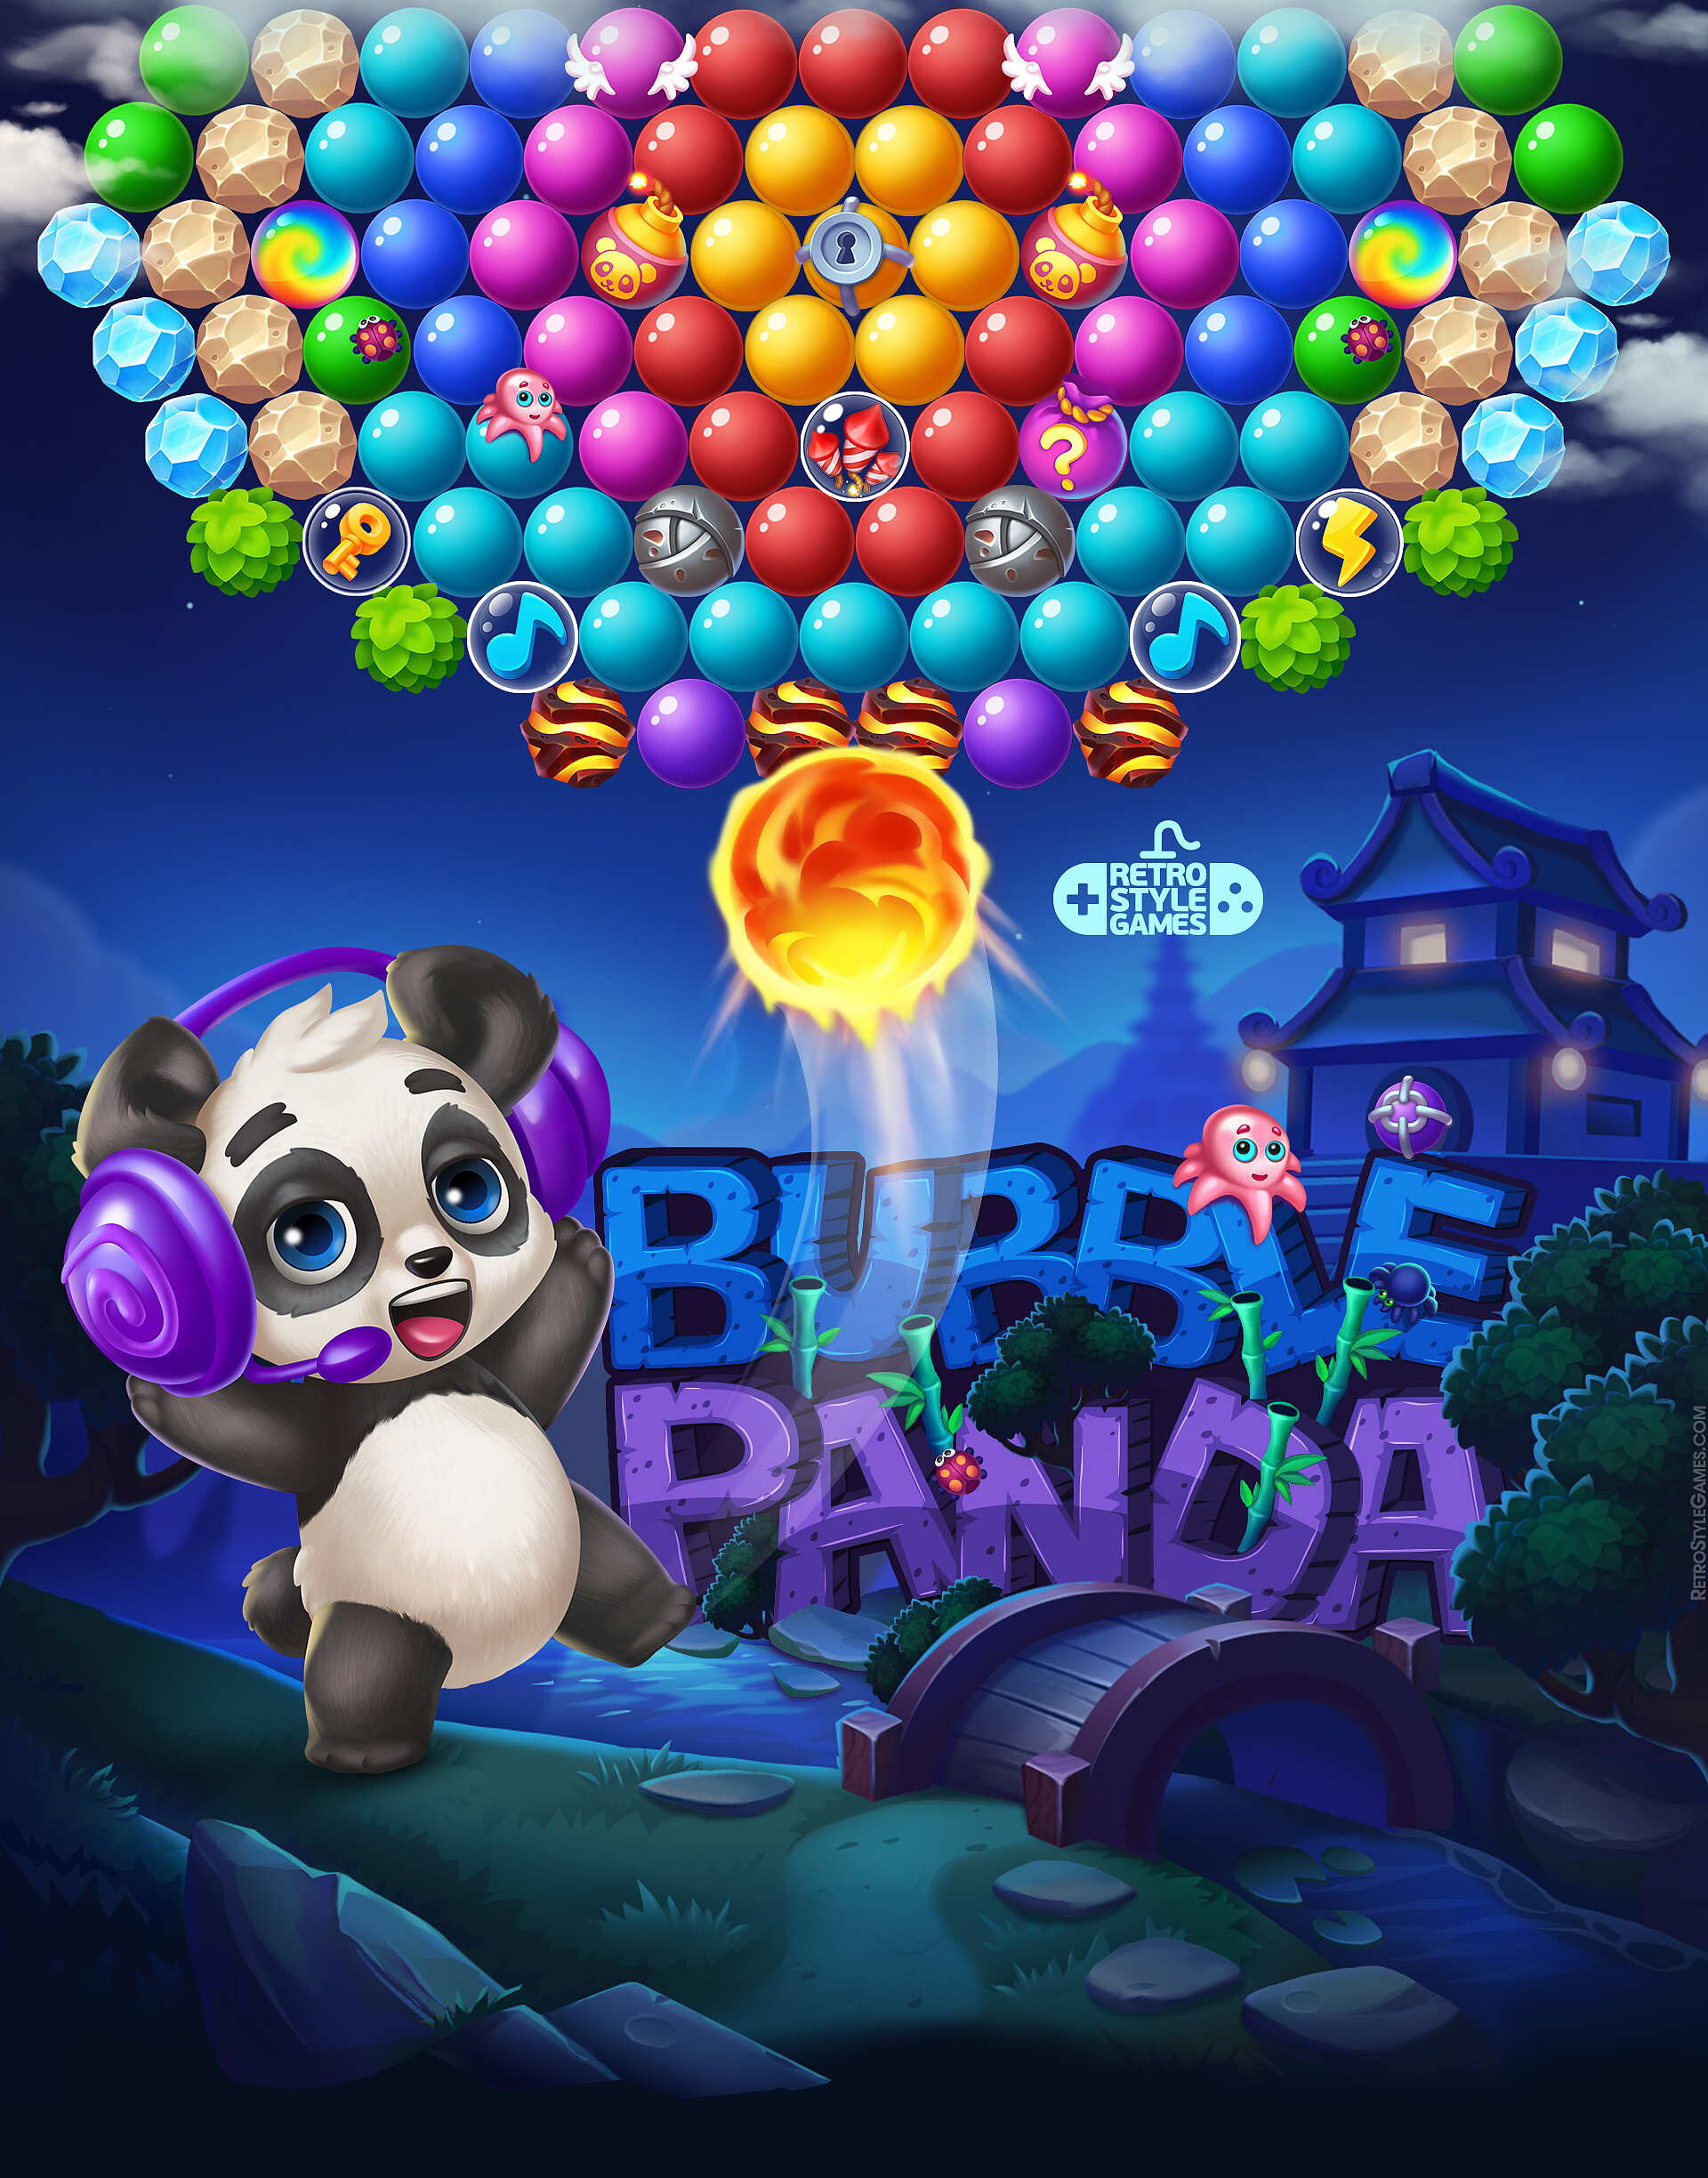 Bubble shooter game Design on Behance